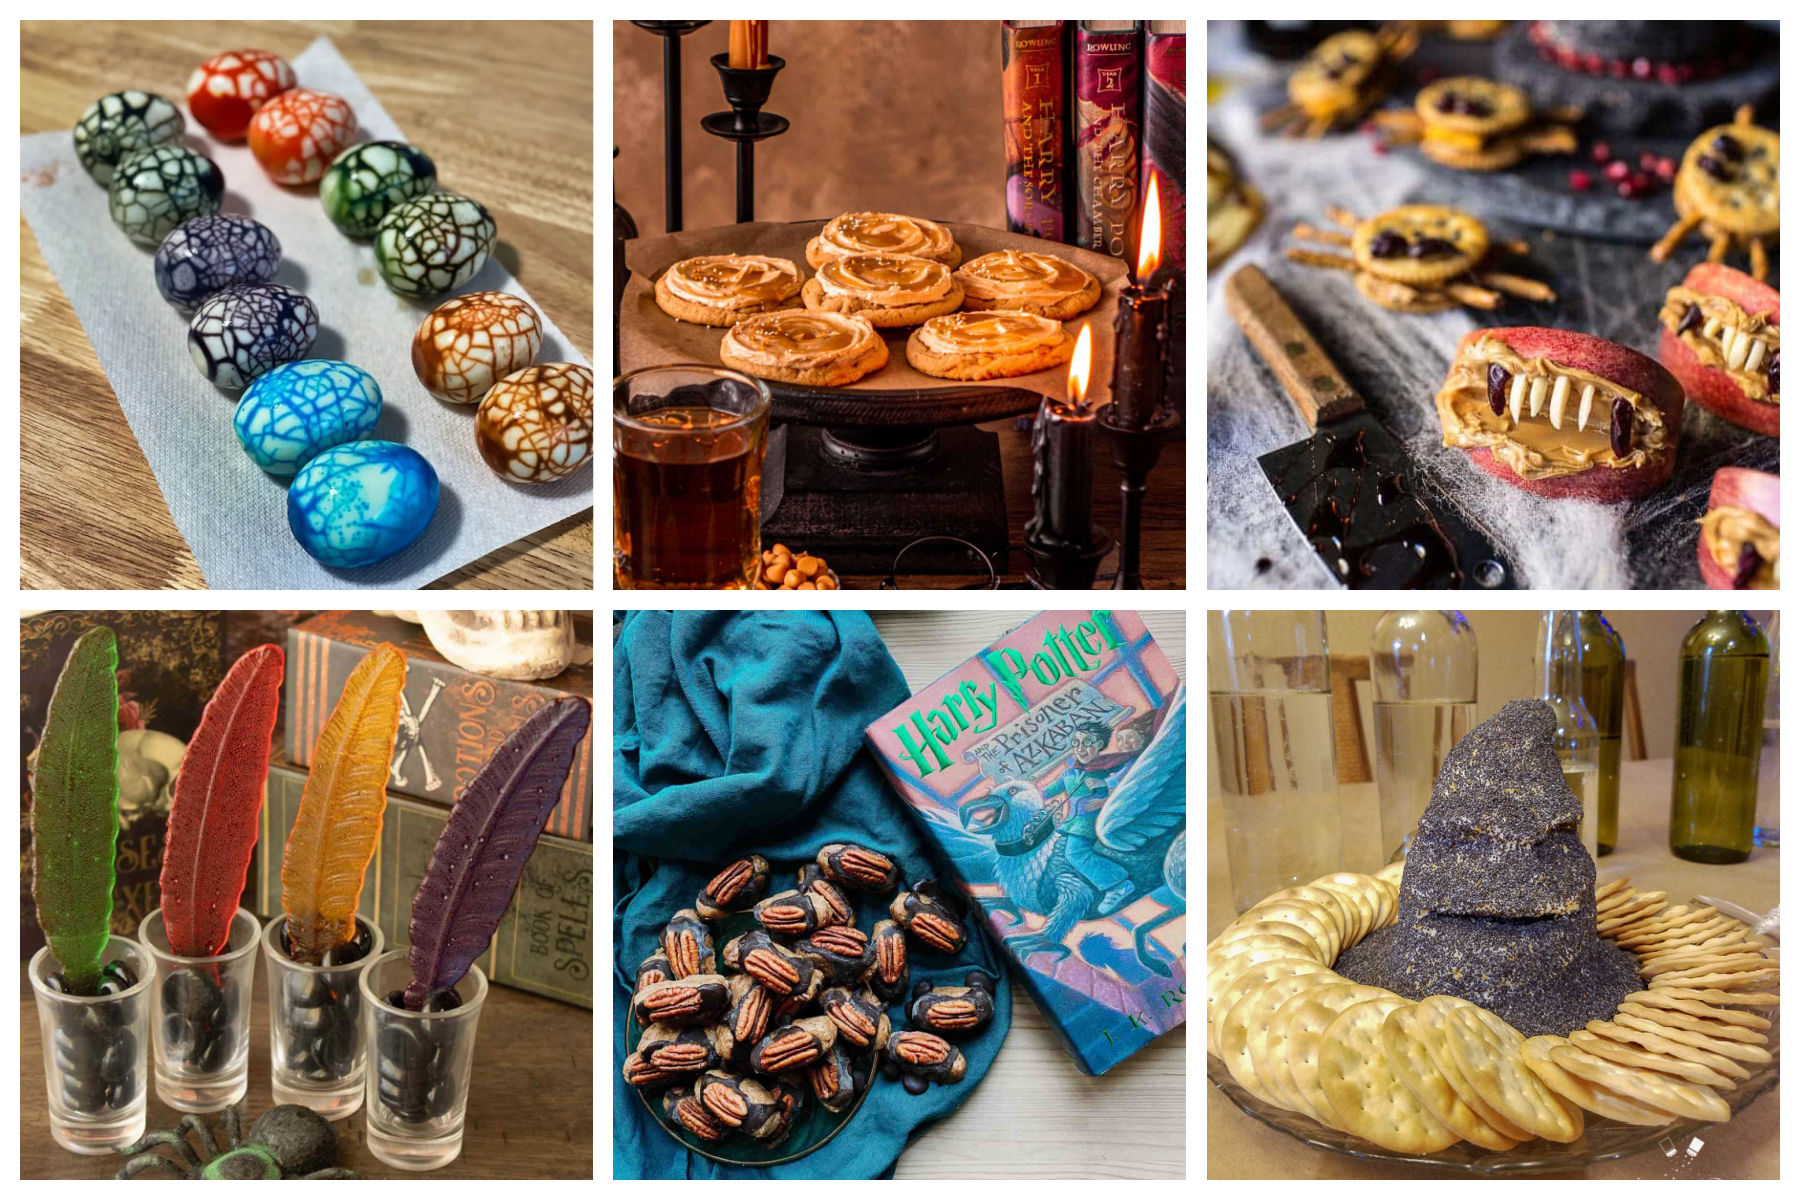 51 Magical Harry Potter Recipes for a Party or Movie Night - Play Party Plan